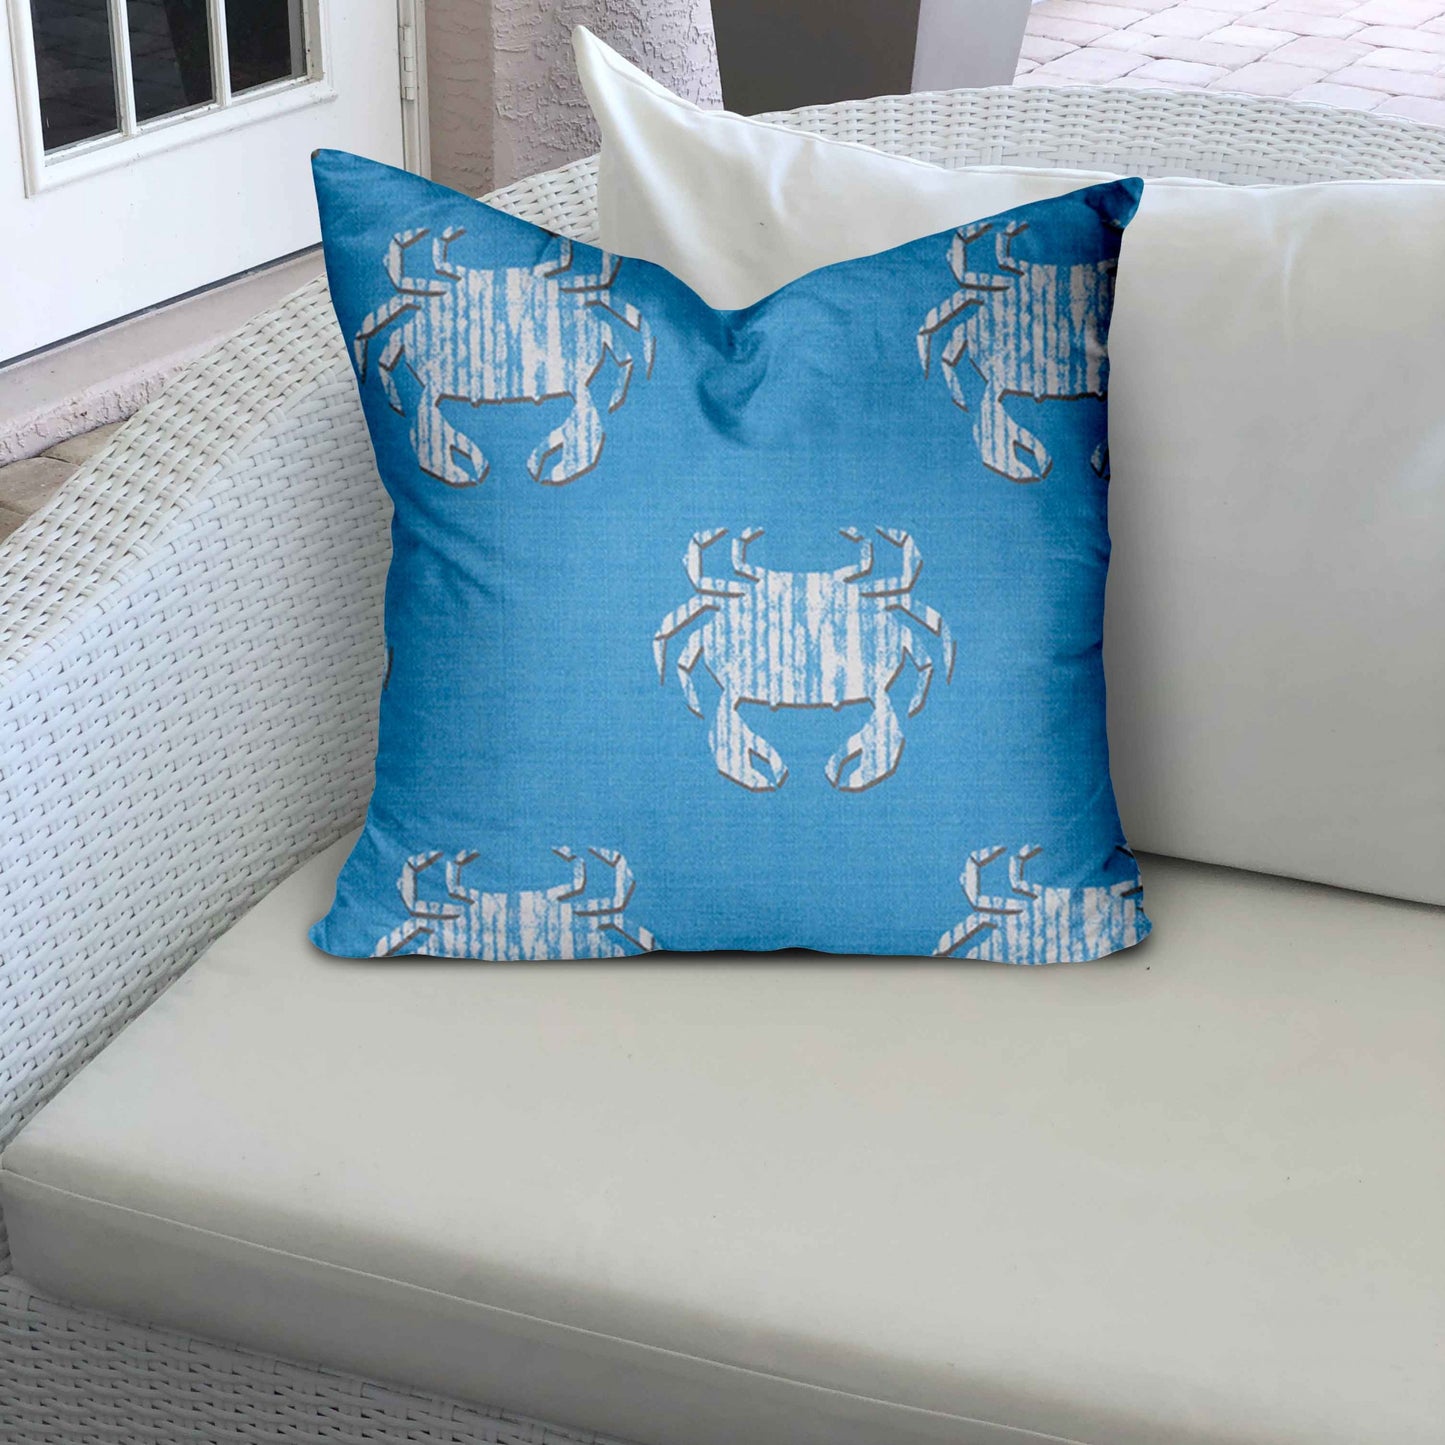 26" X 26" Blue And White Crab Enveloped Coastal Throw Indoor Outdoor Pillow